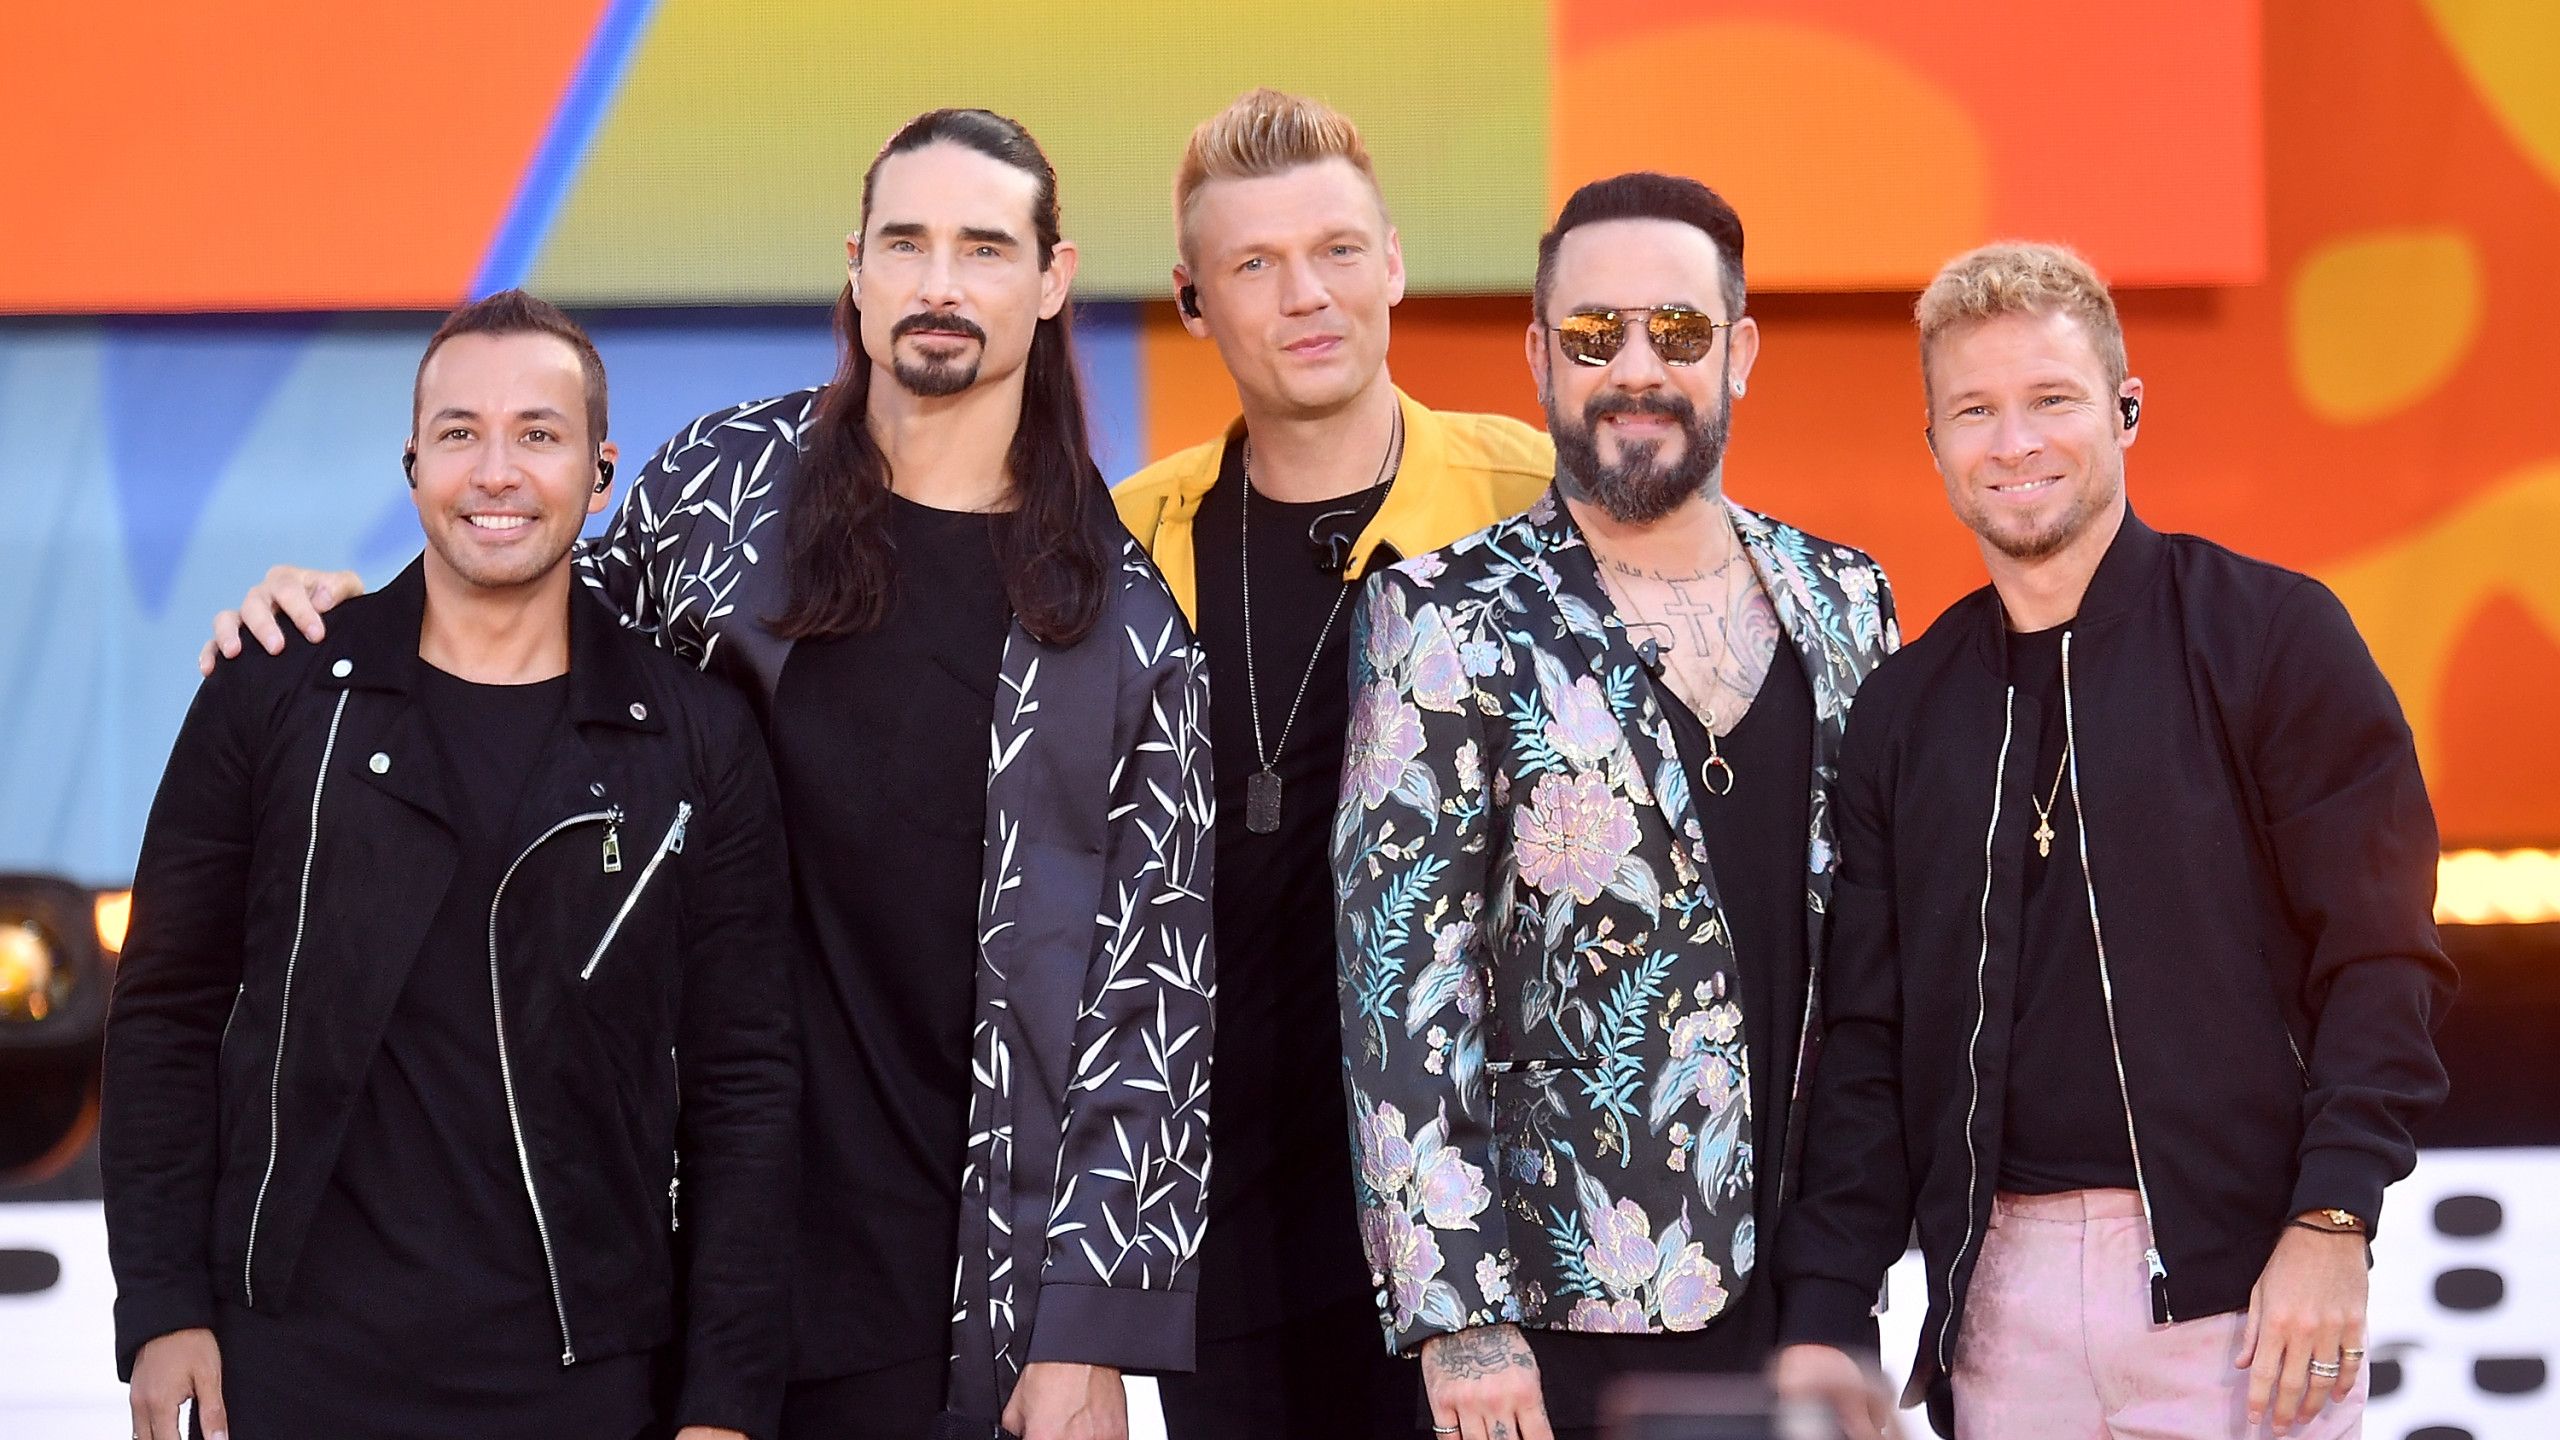 Backstreet Boys coming to Indianapolis in 2019